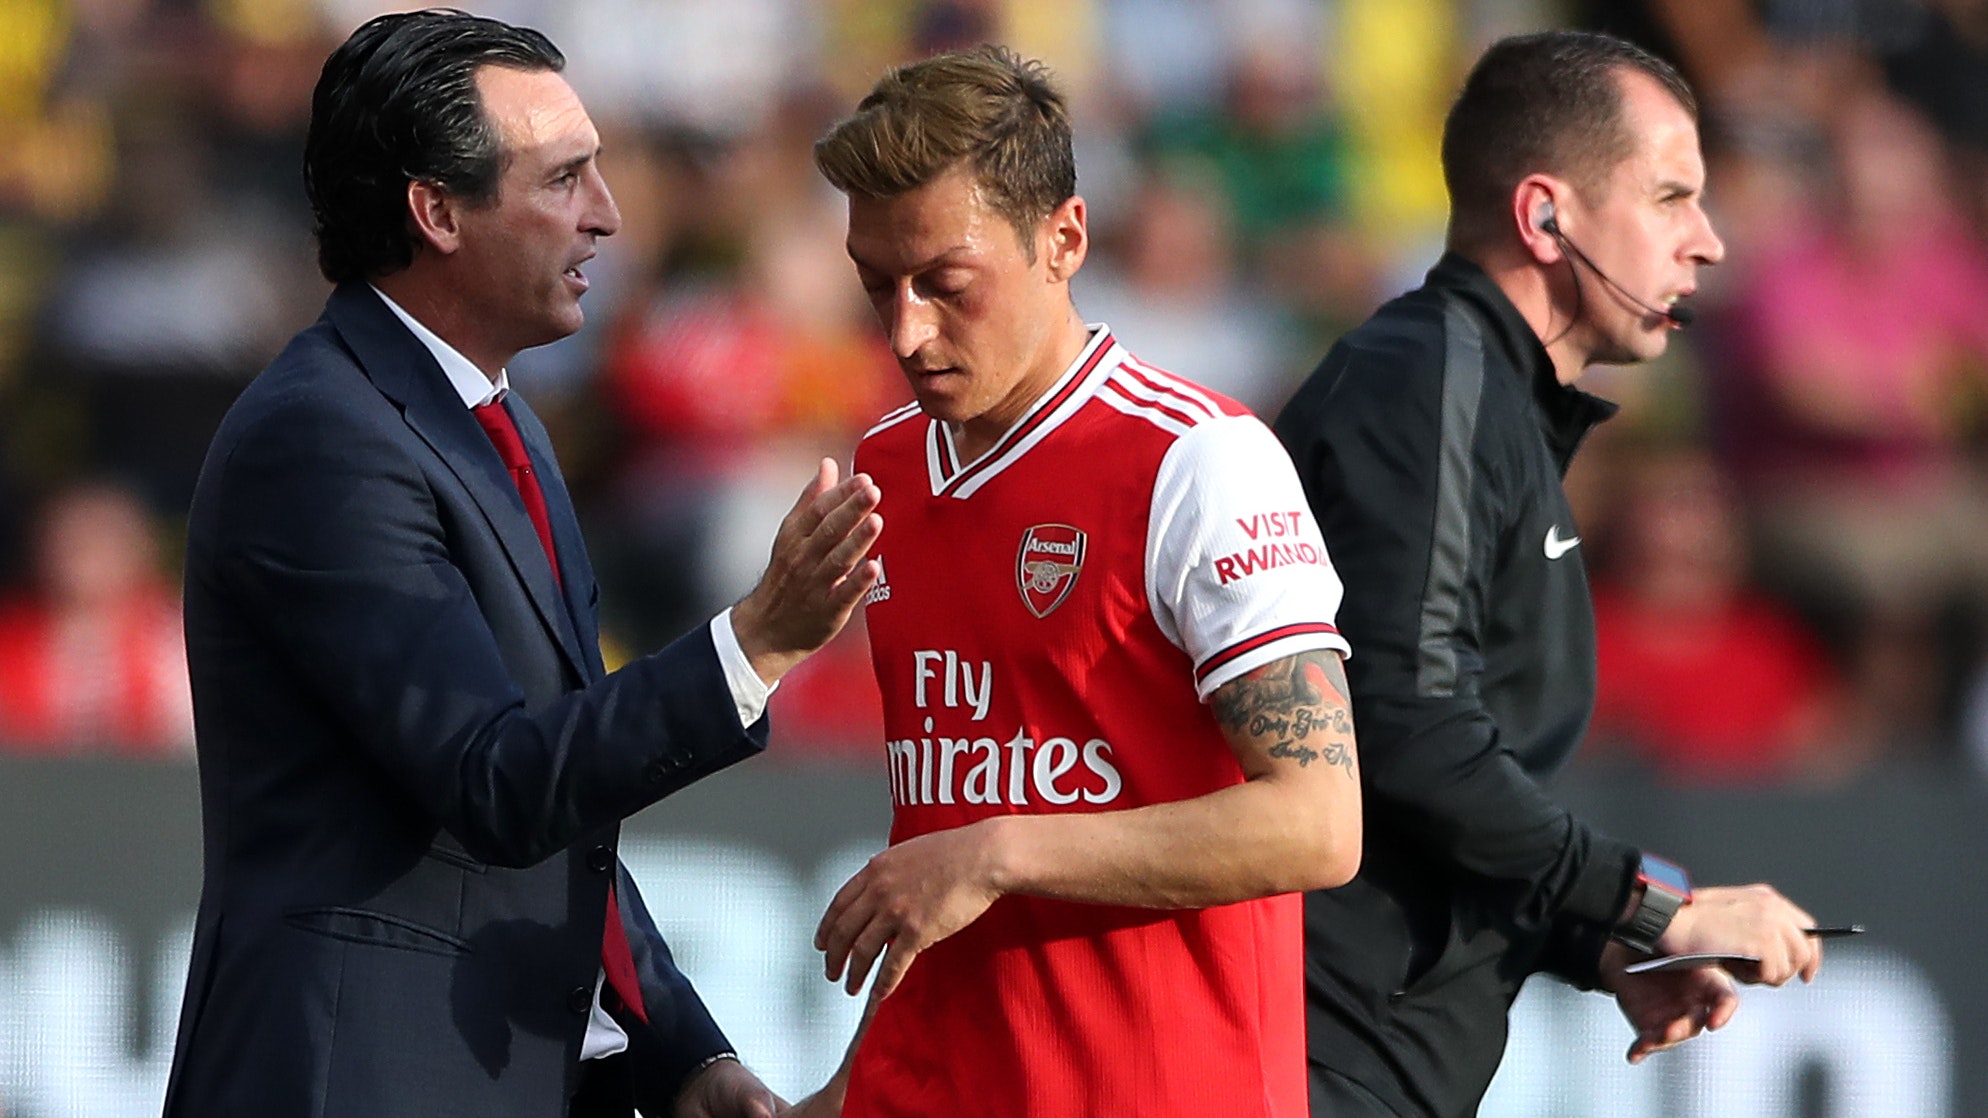 What to make of Mesut Ozil’s cryptic social media update after training footage with Emery surfaces online